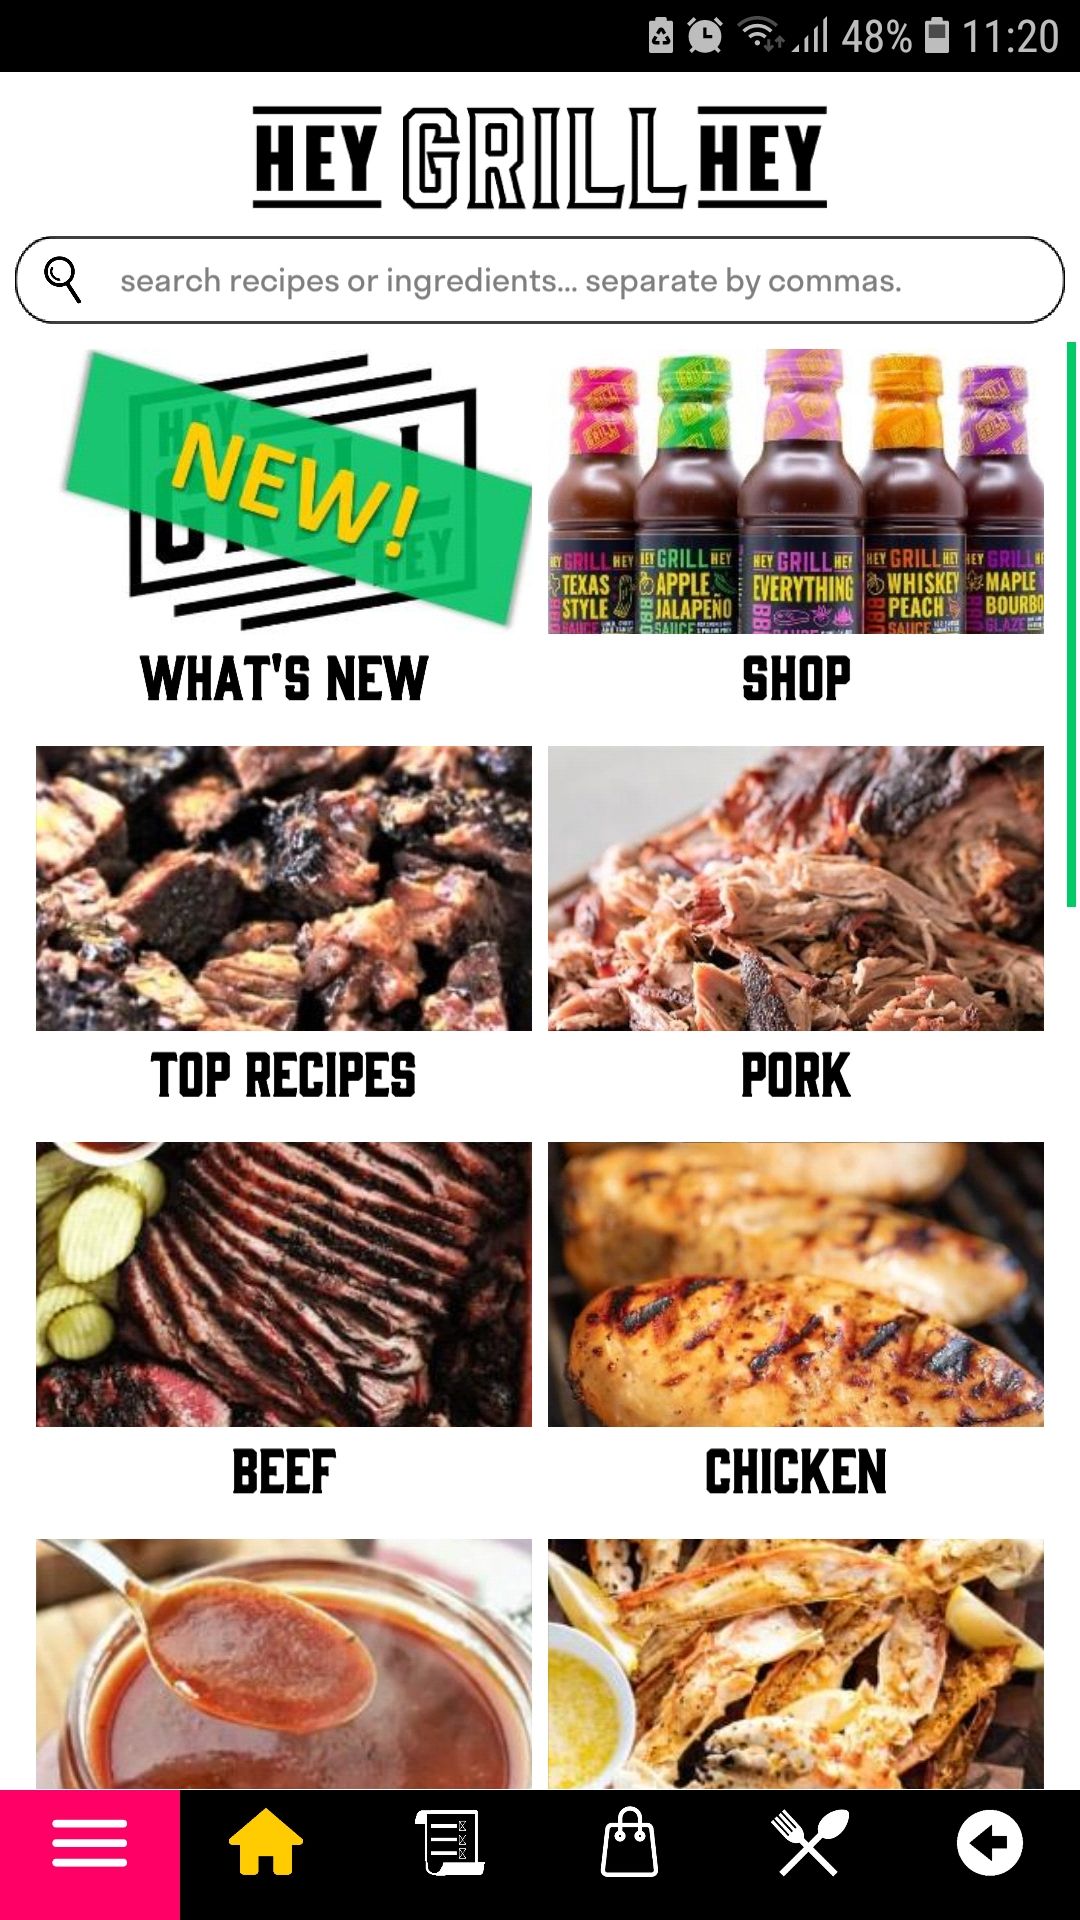 Hey Grill Hey mobile grilling recipe app